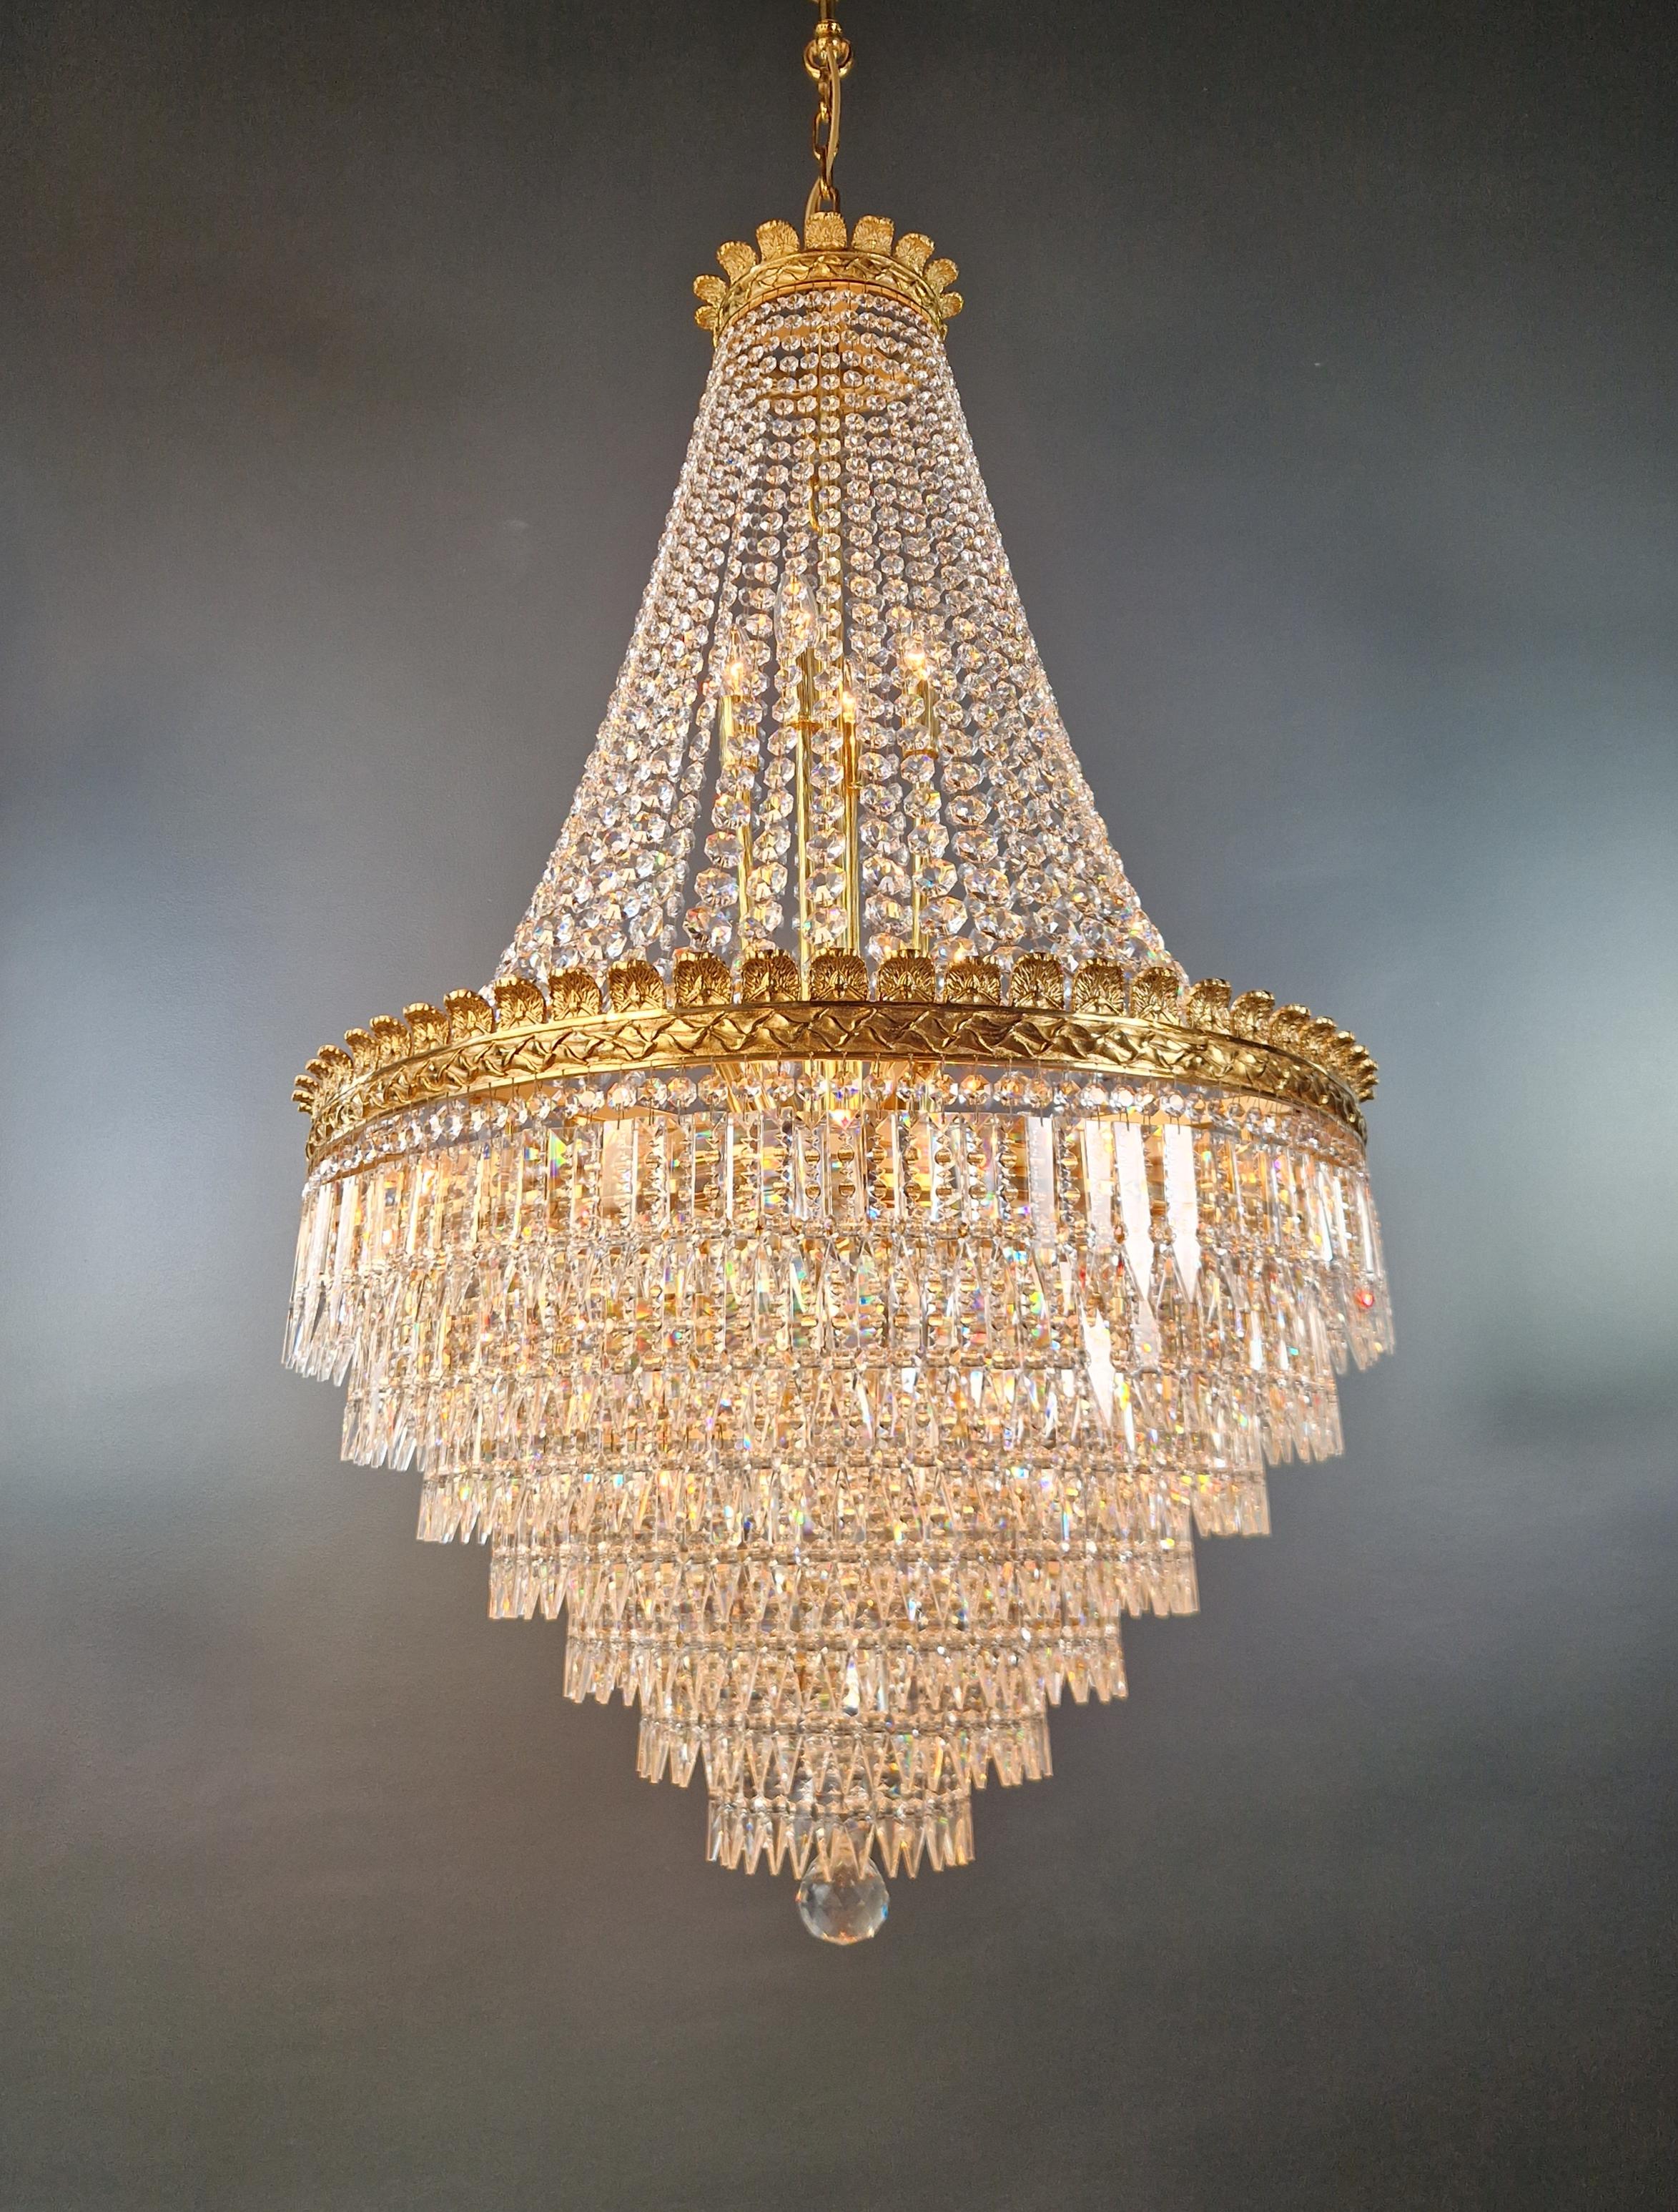 Brass Basket Empire Sac a Pearl Chandelier Crystal Lustre Lamp Antique Gold In New Condition For Sale In Berlin, DE